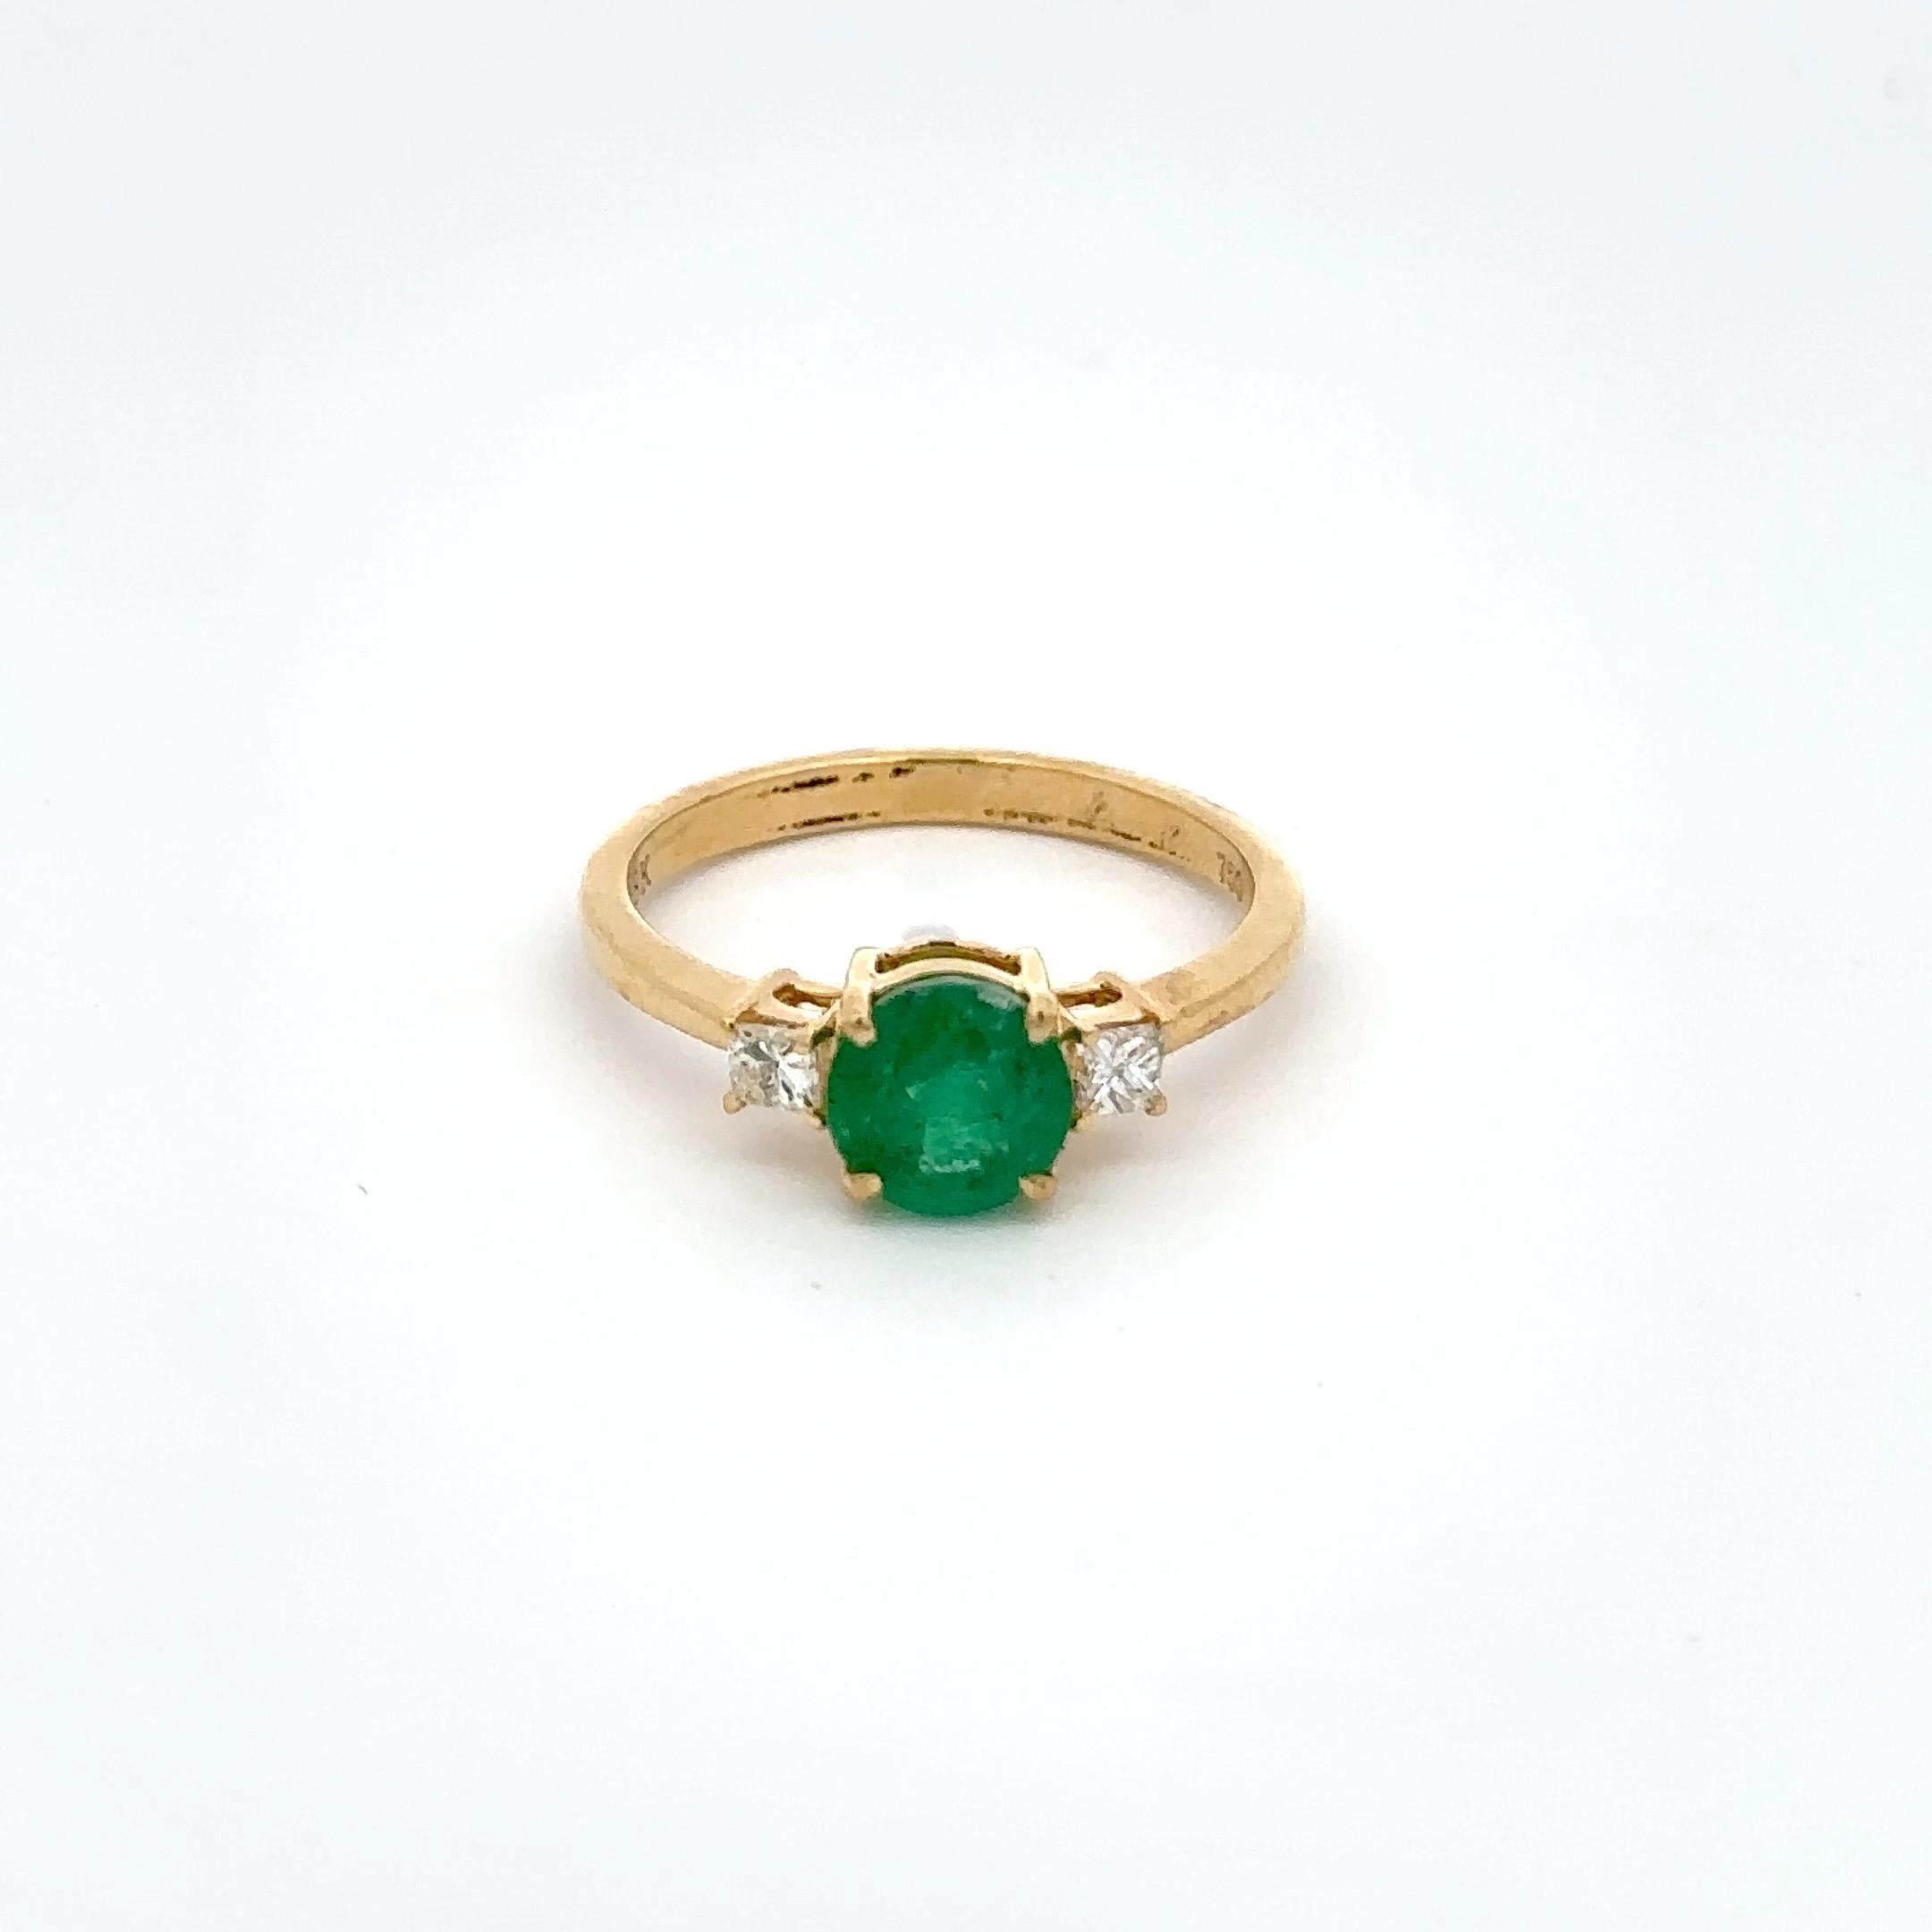 For Sale:  Modern Three-Stone Diamond Emerald Ring in 18k Solid Yellow Gold 3